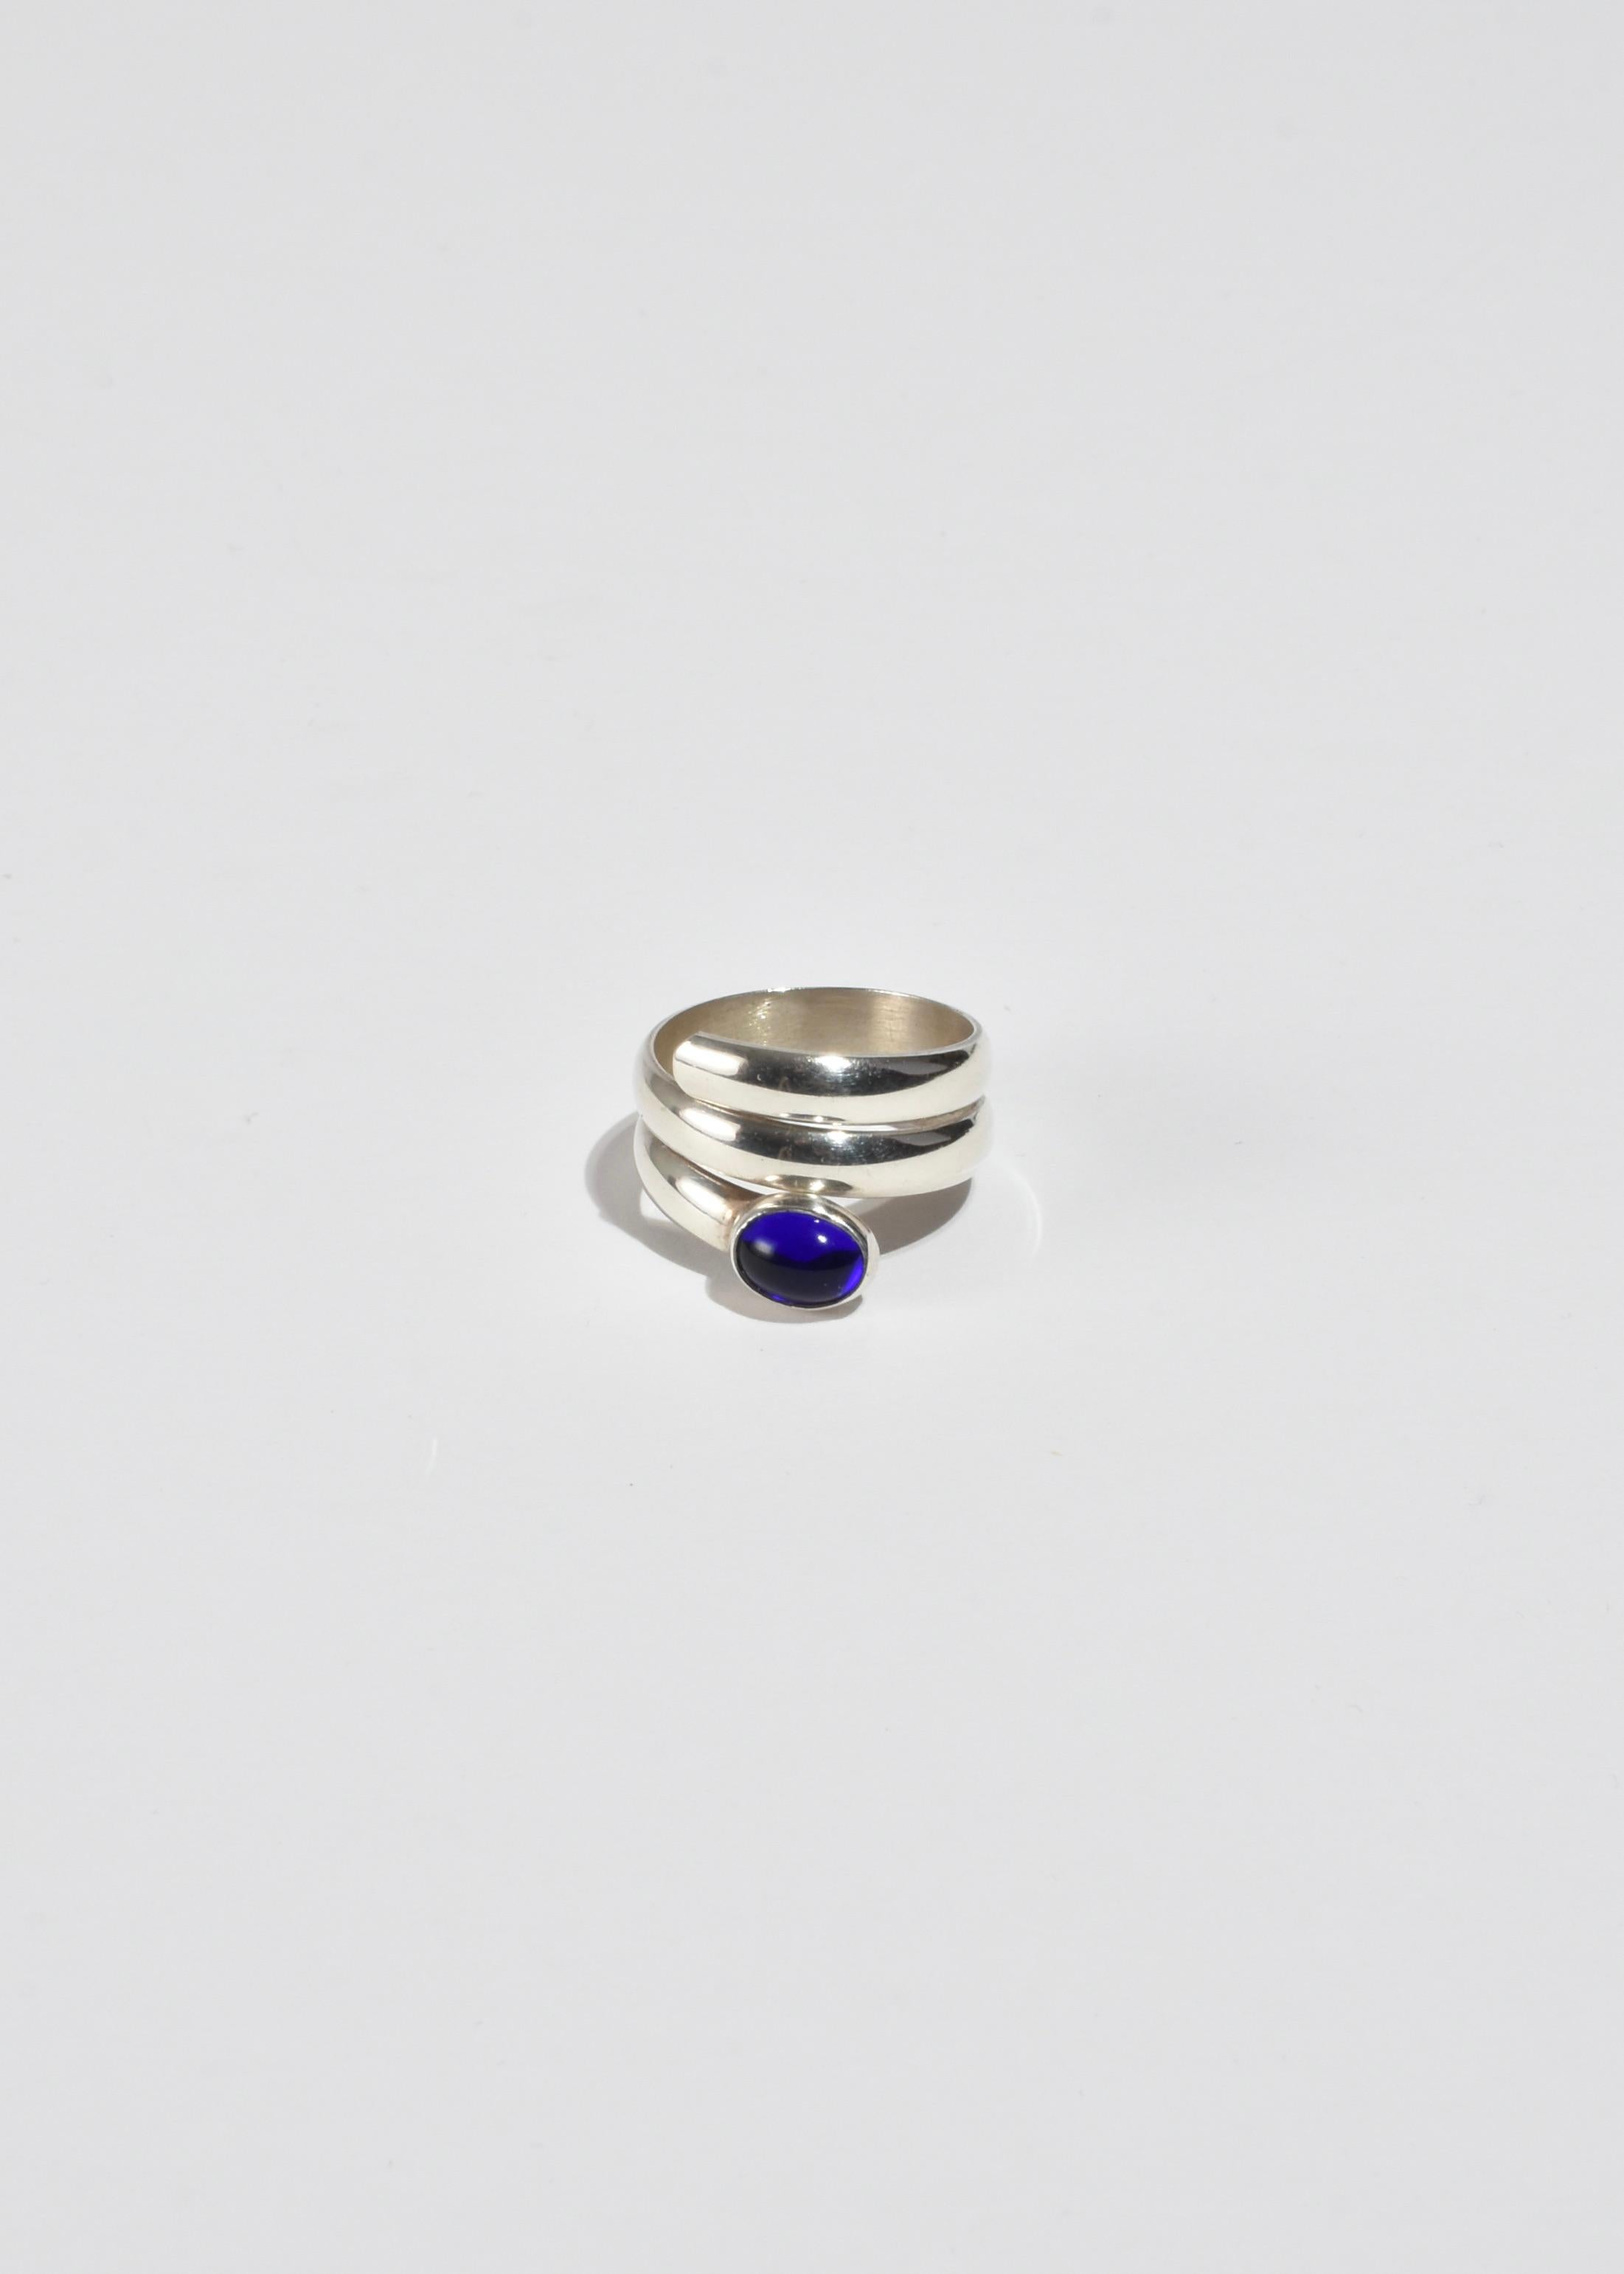 Vintage silver spiral ring with oval cobalt blue cabochon. Stamped Mexico, 925.

Material: Sterling silver, glass.